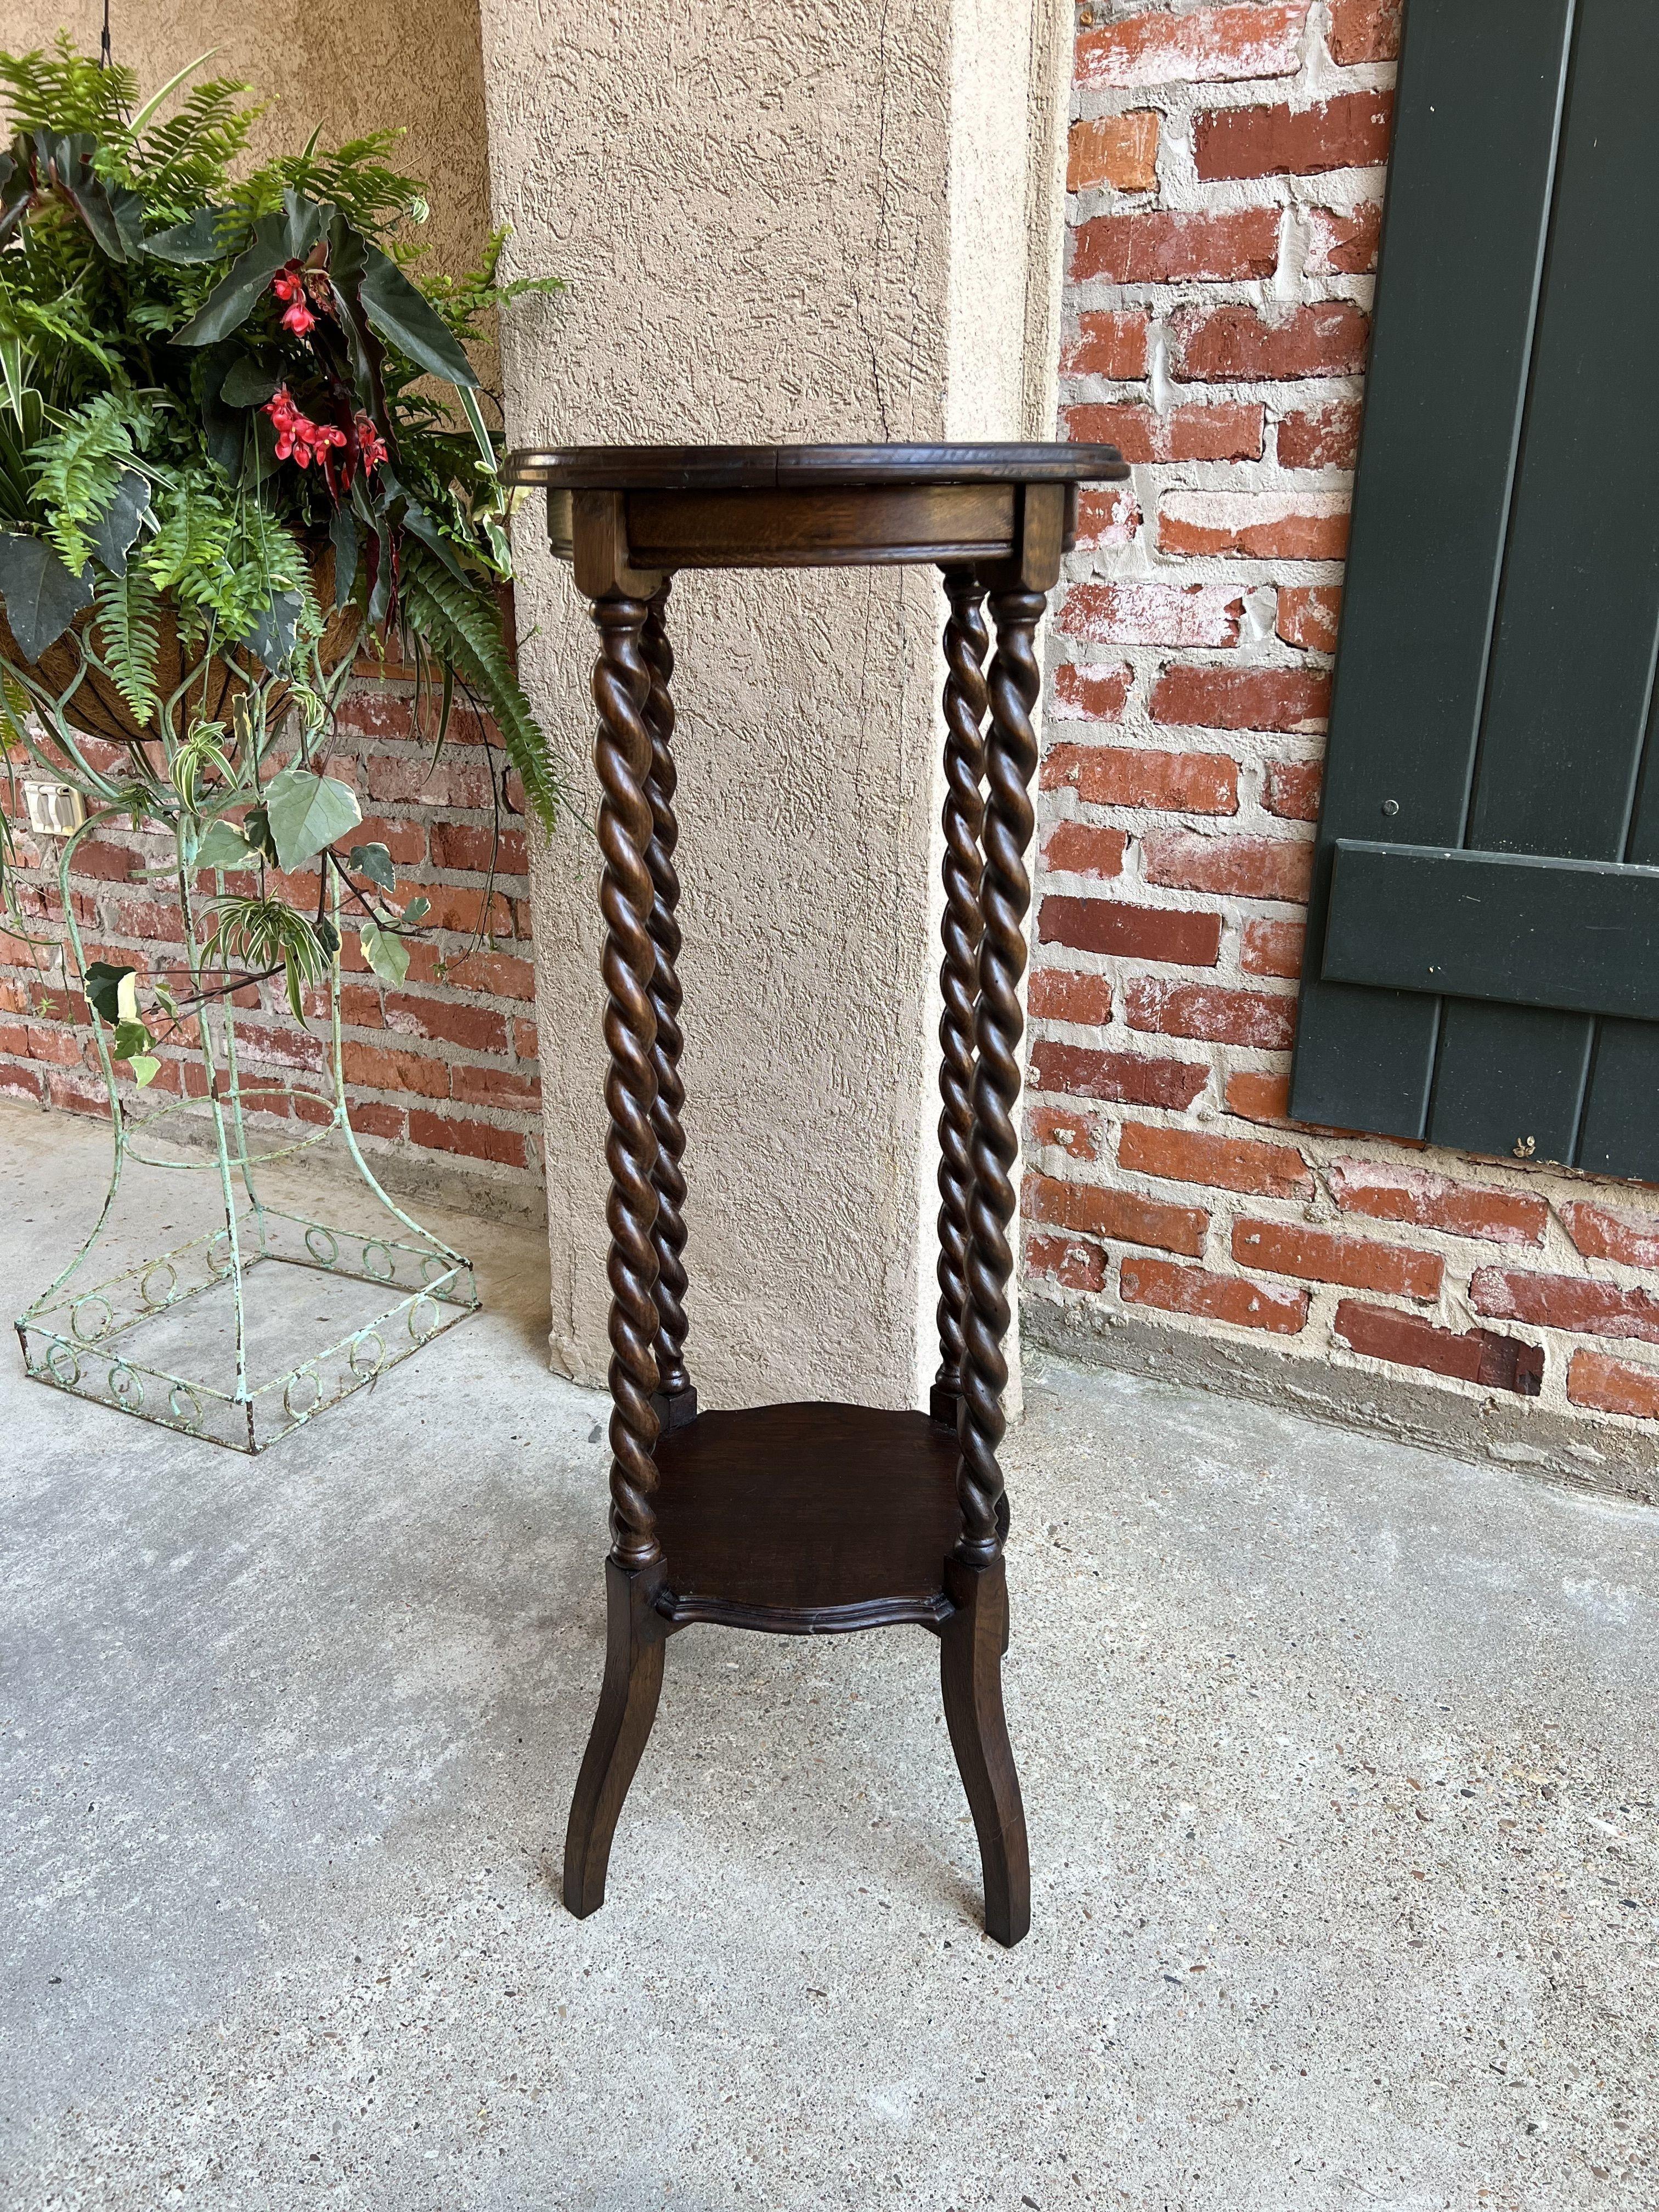 Antique English oak barley twist plant bronze display stand round table Jacobean.

Direct from London, a very versatile antique English display/plant stand.
Traditional British style, with four long barley twist legs. Two levels for display, with